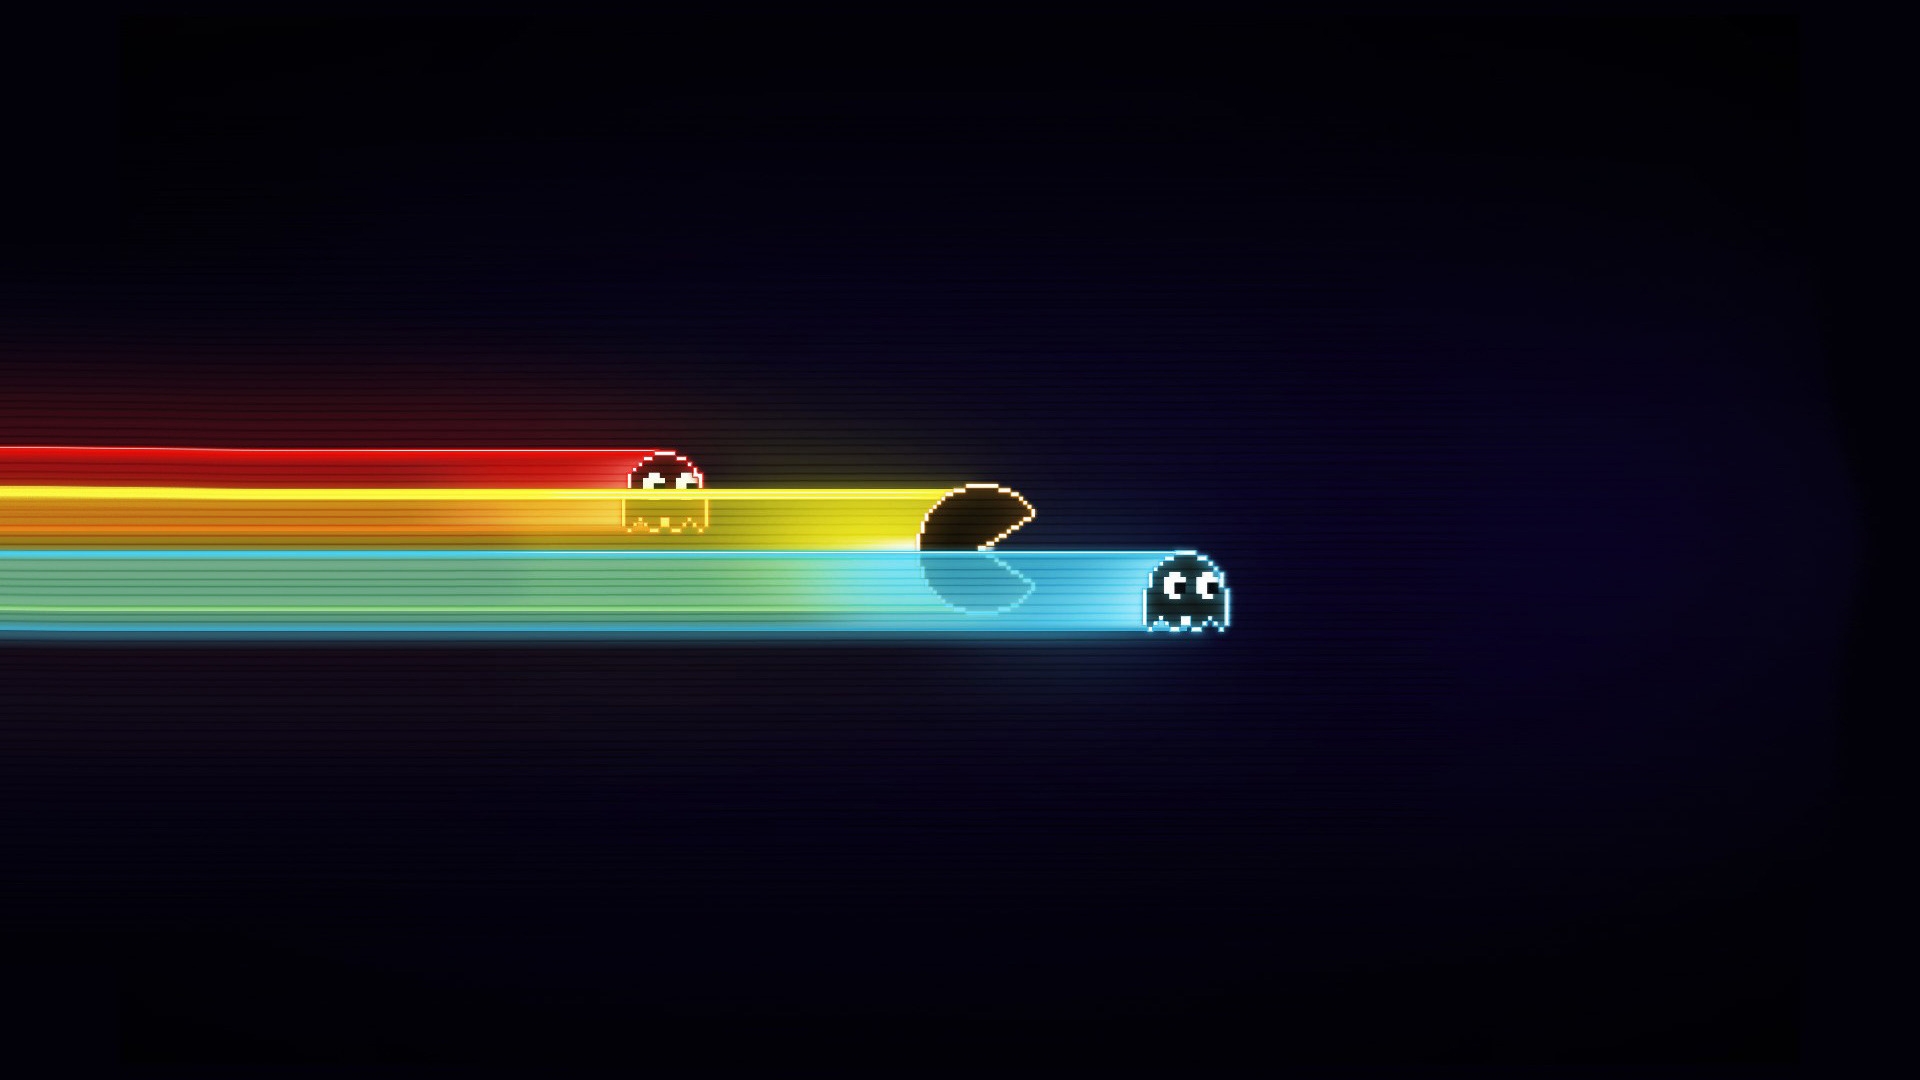 Pac Man for 1920 x 1080 HDTV 1080p resolution